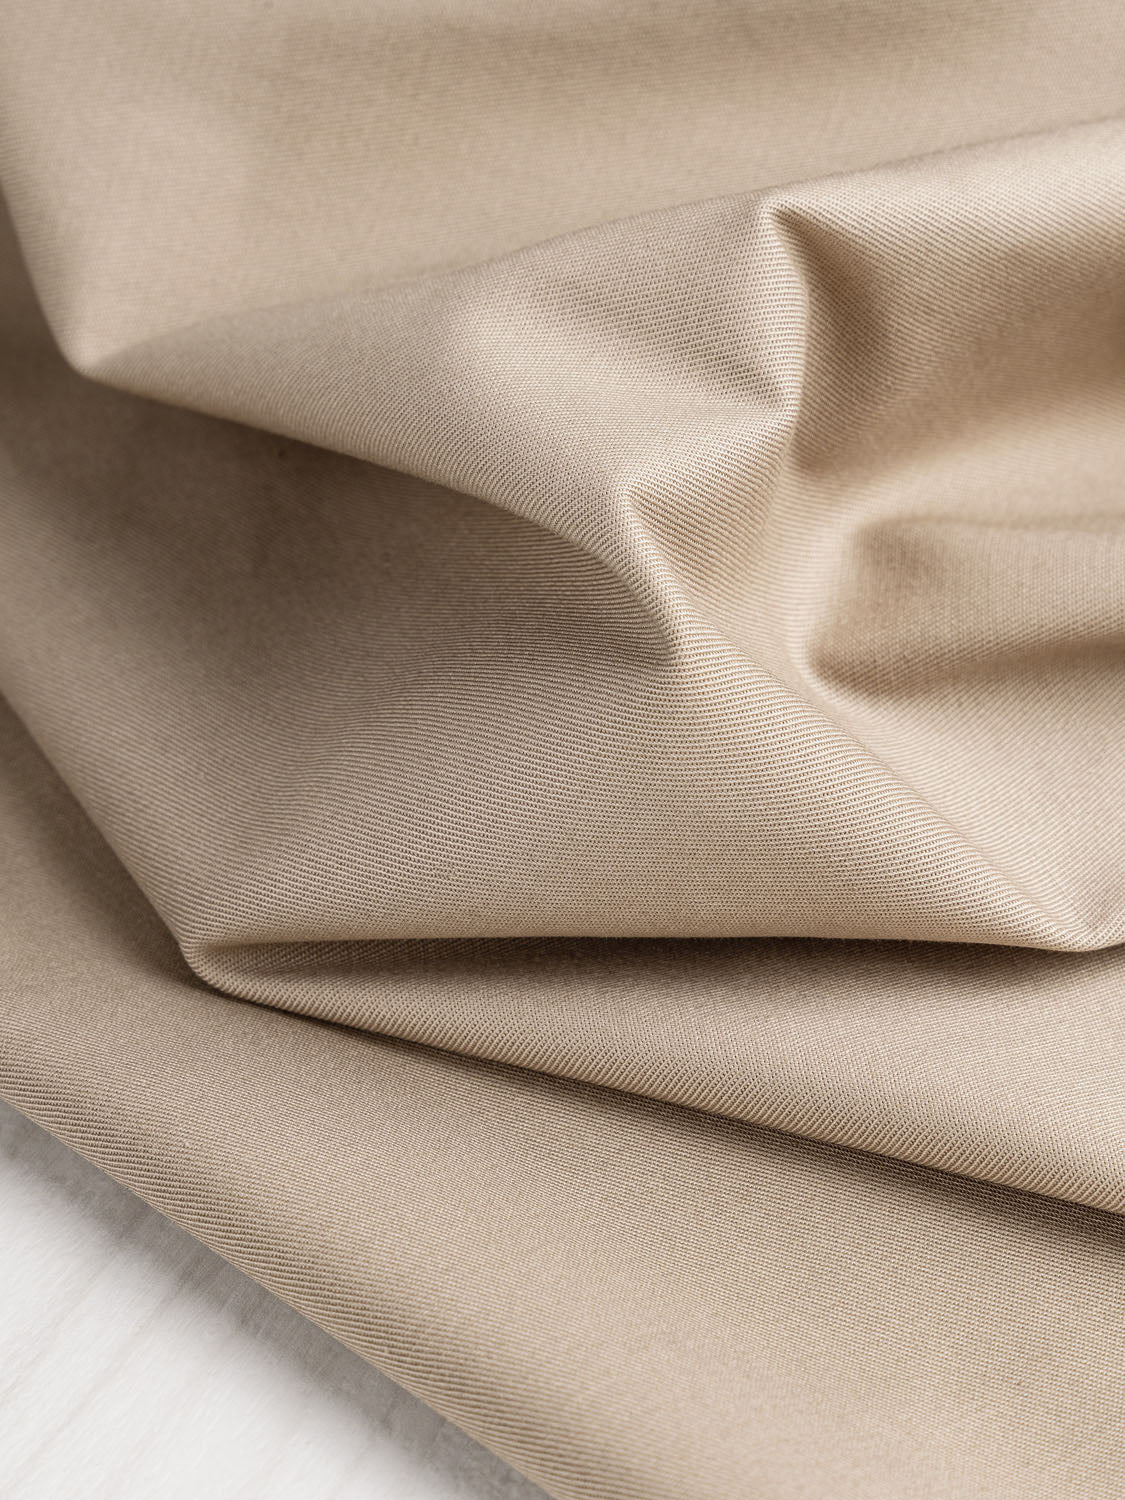 Brushed 100% Cotton Twill Fabric by the Yard Stressed Khaki